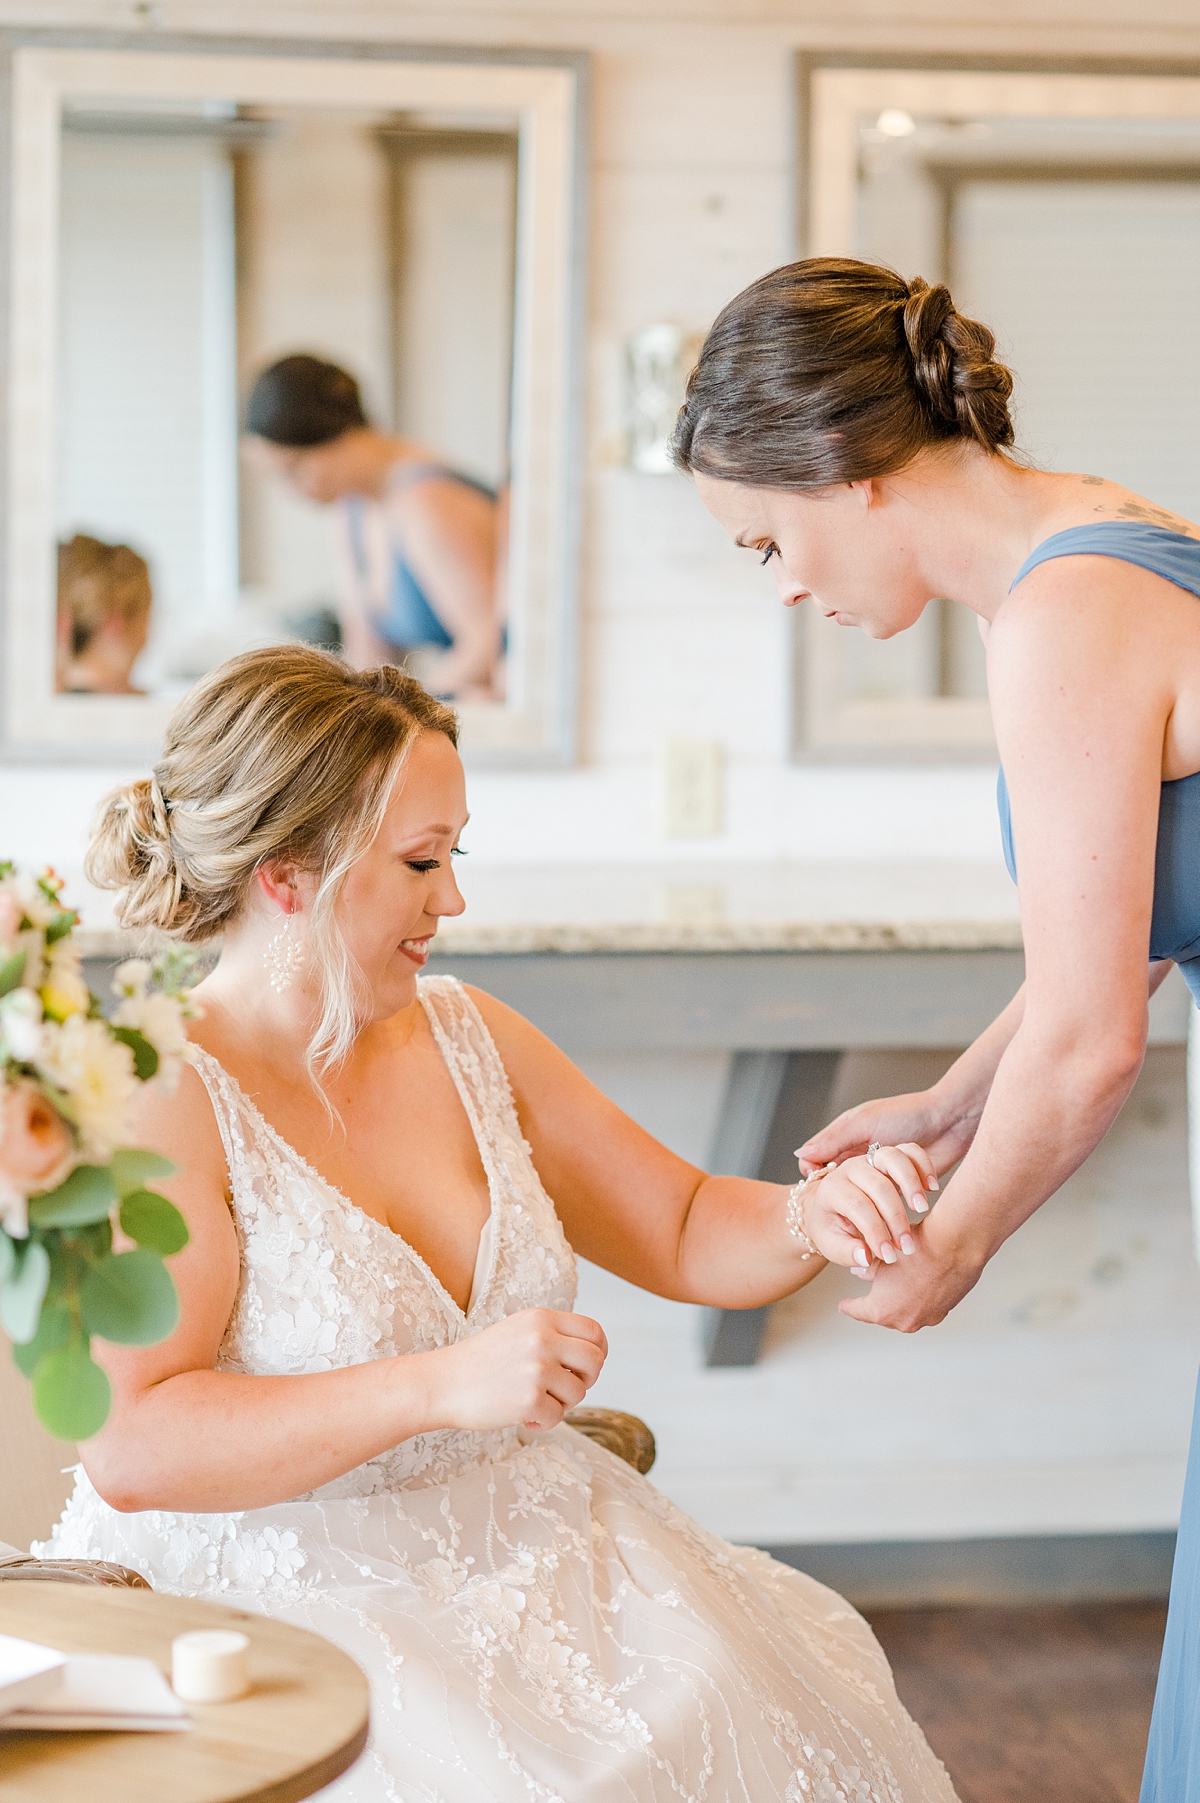 Bridal Portraits at The Magnolia Venue in Tennessee. Wedding Photography by Virginia Wedding Photographer Kailey Brianne Photography. 